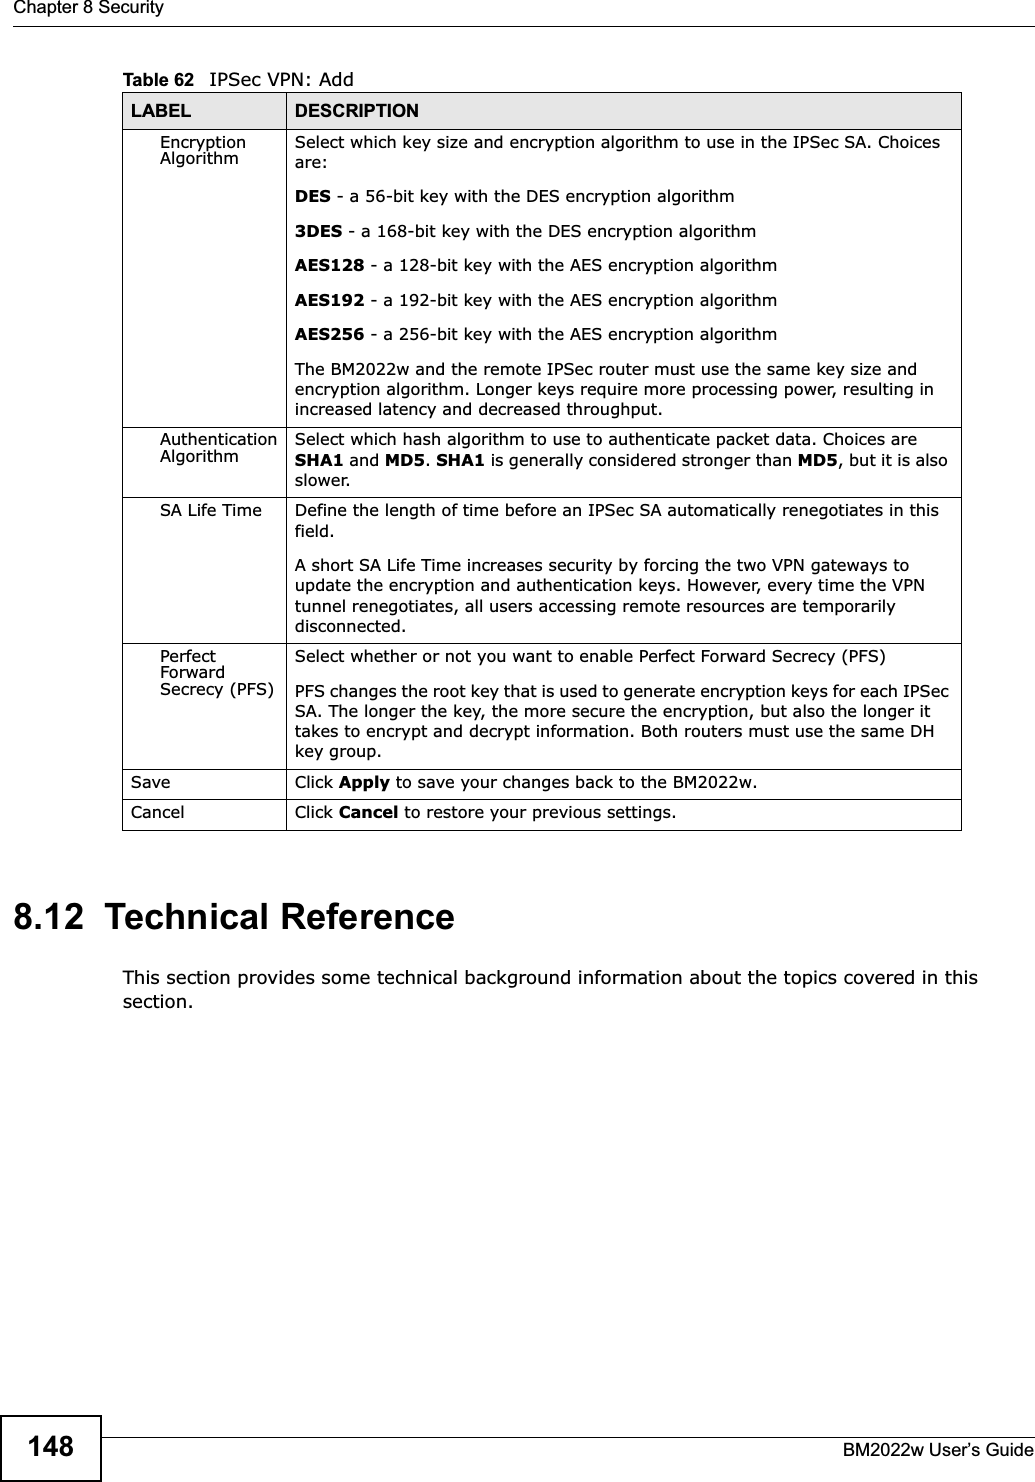 Chapter 8 SecurityBM2022w User’s Guide1488.12  Technical ReferenceThis section provides some technical background information about the topics covered in this section.Encryption Algorithm Select which key size and encryption algorithm to use in the IPSec SA. Choices are:DES - a 56-bit key with the DES encryption algorithm3DES - a 168-bit key with the DES encryption algorithmAES128 - a 128-bit key with the AES encryption algorithmAES192 - a 192-bit key with the AES encryption algorithmAES256 - a 256-bit key with the AES encryption algorithmThe BM2022w and the remote IPSec router must use the same key size and encryption algorithm. Longer keys require more processing power, resulting in increased latency and decreased throughput.Authentication Algorithm Select which hash algorithm to use to authenticate packet data. Choices are SHA1 and MD5.SHA1 is generally considered stronger than MD5, but it is also slower.SA Life Time Define the length of time before an IPSec SA automatically renegotiates in this field.A short SA Life Time increases security by forcing the two VPN gateways to update the encryption and authentication keys. However, every time the VPN tunnel renegotiates, all users accessing remote resources are temporarily disconnected. Perfect Forward Secrecy (PFS)Select whether or not you want to enable Perfect Forward Secrecy (PFS)PFS changes the root key that is used to generate encryption keys for each IPSec SA. The longer the key, the more secure the encryption, but also the longer it takes to encrypt and decrypt information. Both routers must use the same DH key group.Save Click Apply to save your changes back to the BM2022w.Cancel Click Cancel to restore your previous settings.Table 62   IPSec VPN: AddLABEL DESCRIPTION